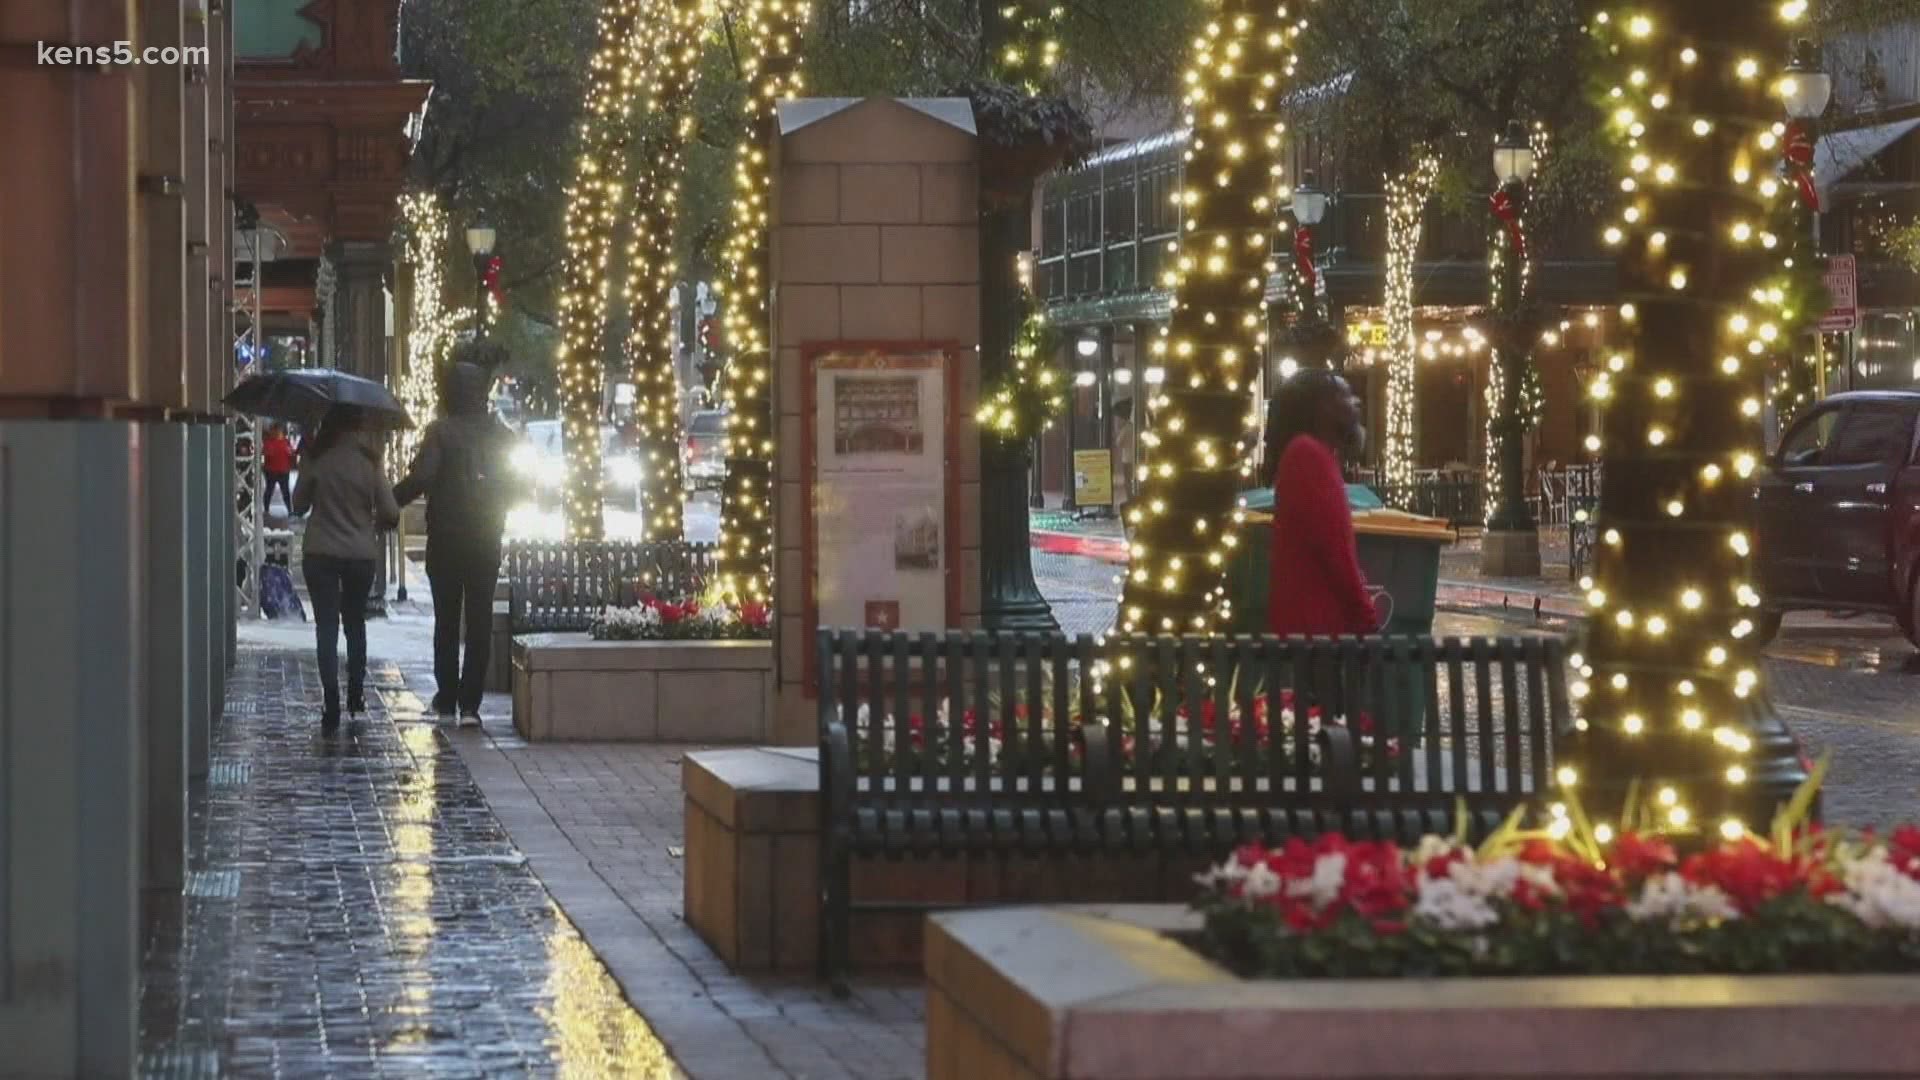 Centro San Antonio is bringing some snow to San Antonio this December with the help of a little holiday magic. Digital Journalist Megan Ball explains.